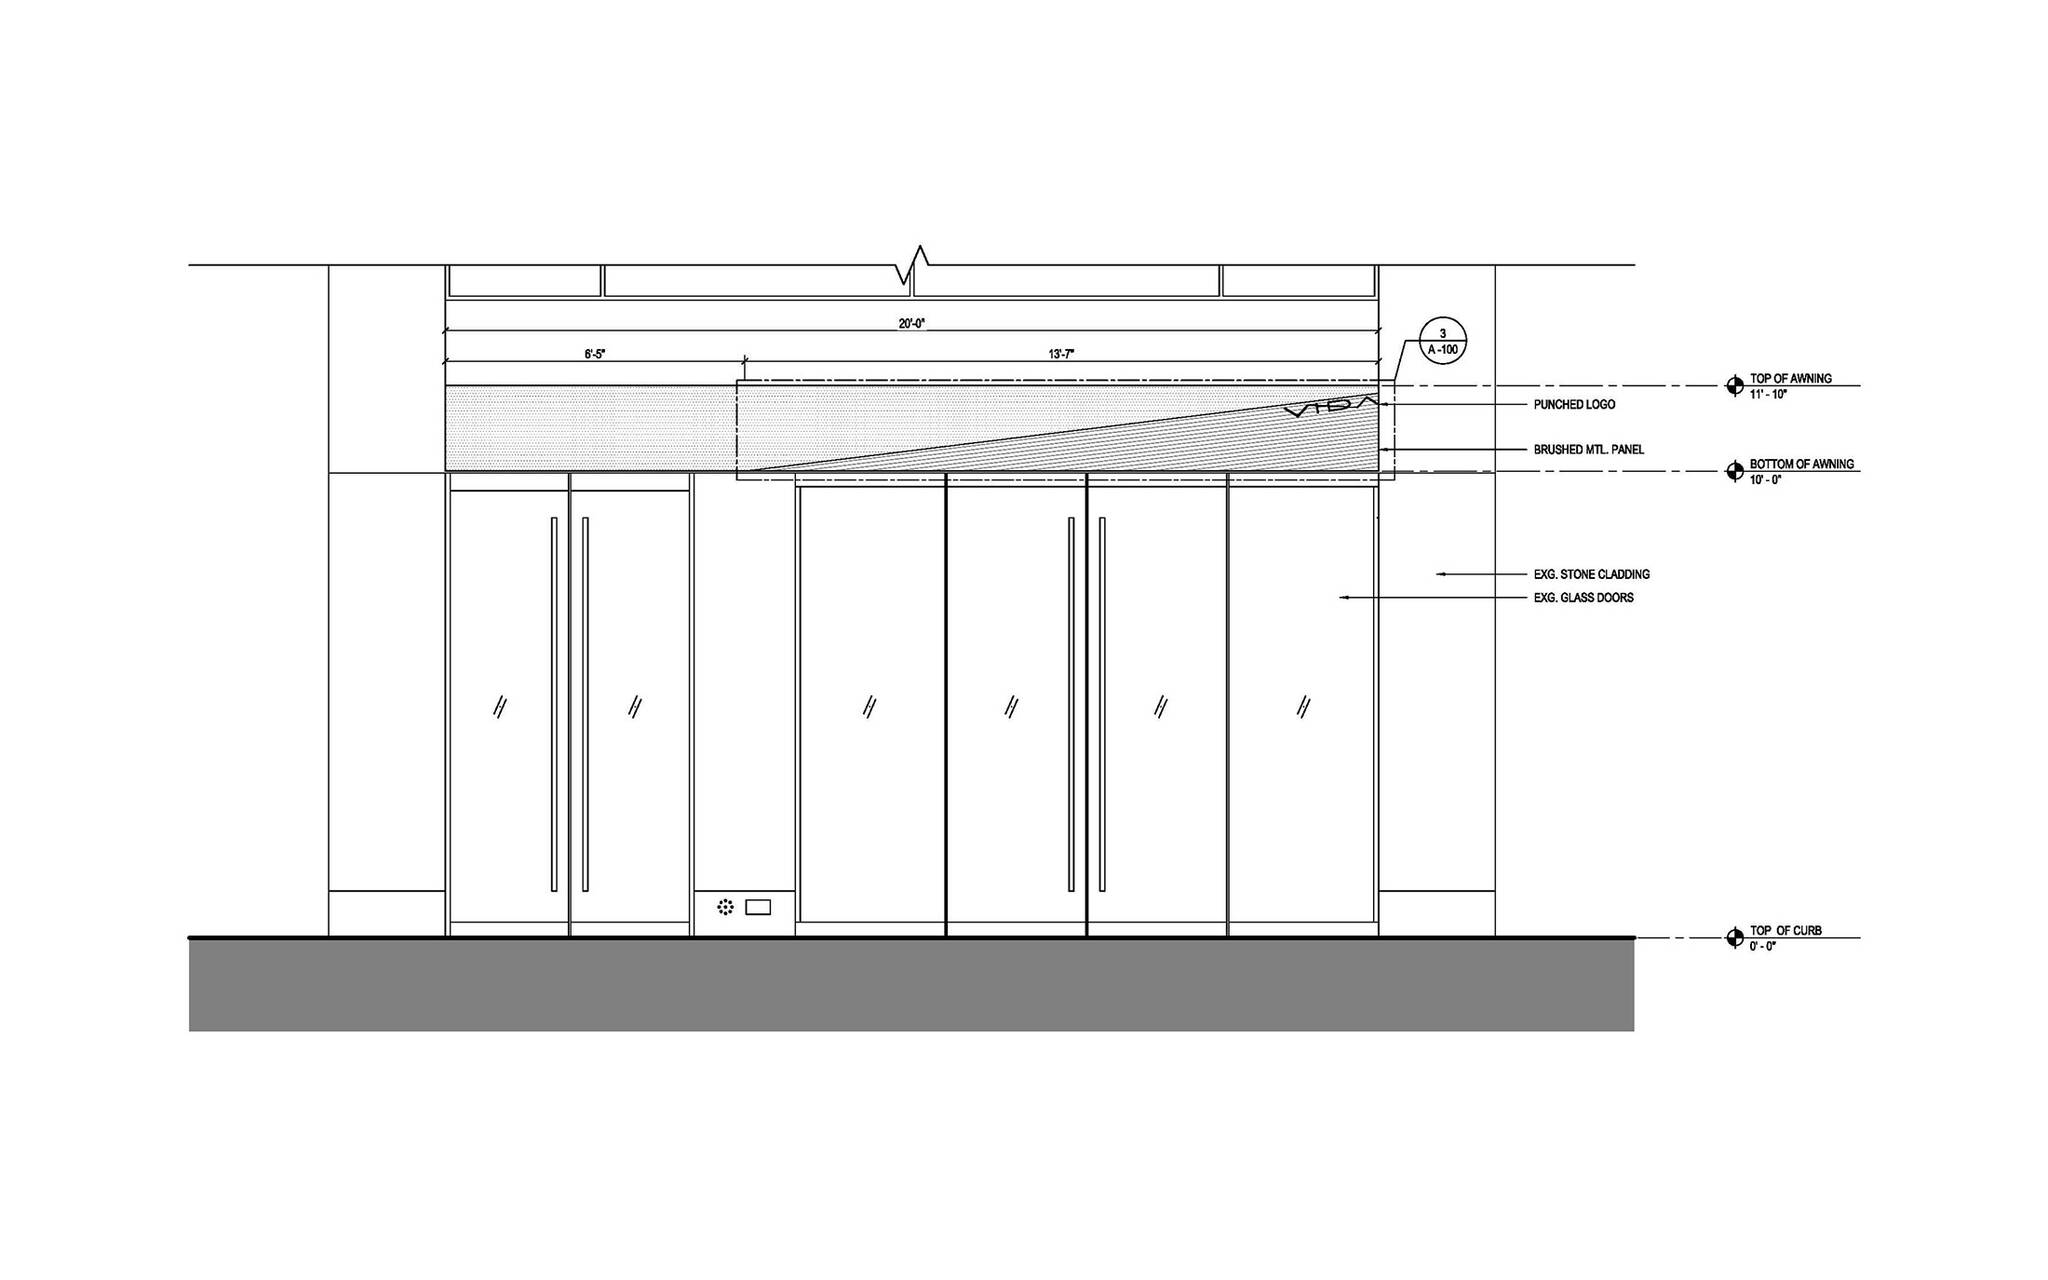 Front view plan of the Vida Shoes International canopy project for the shop located at 29 West 56th Street in Midtown, New York City designed by the architecture studio Danny Forster & Architecture